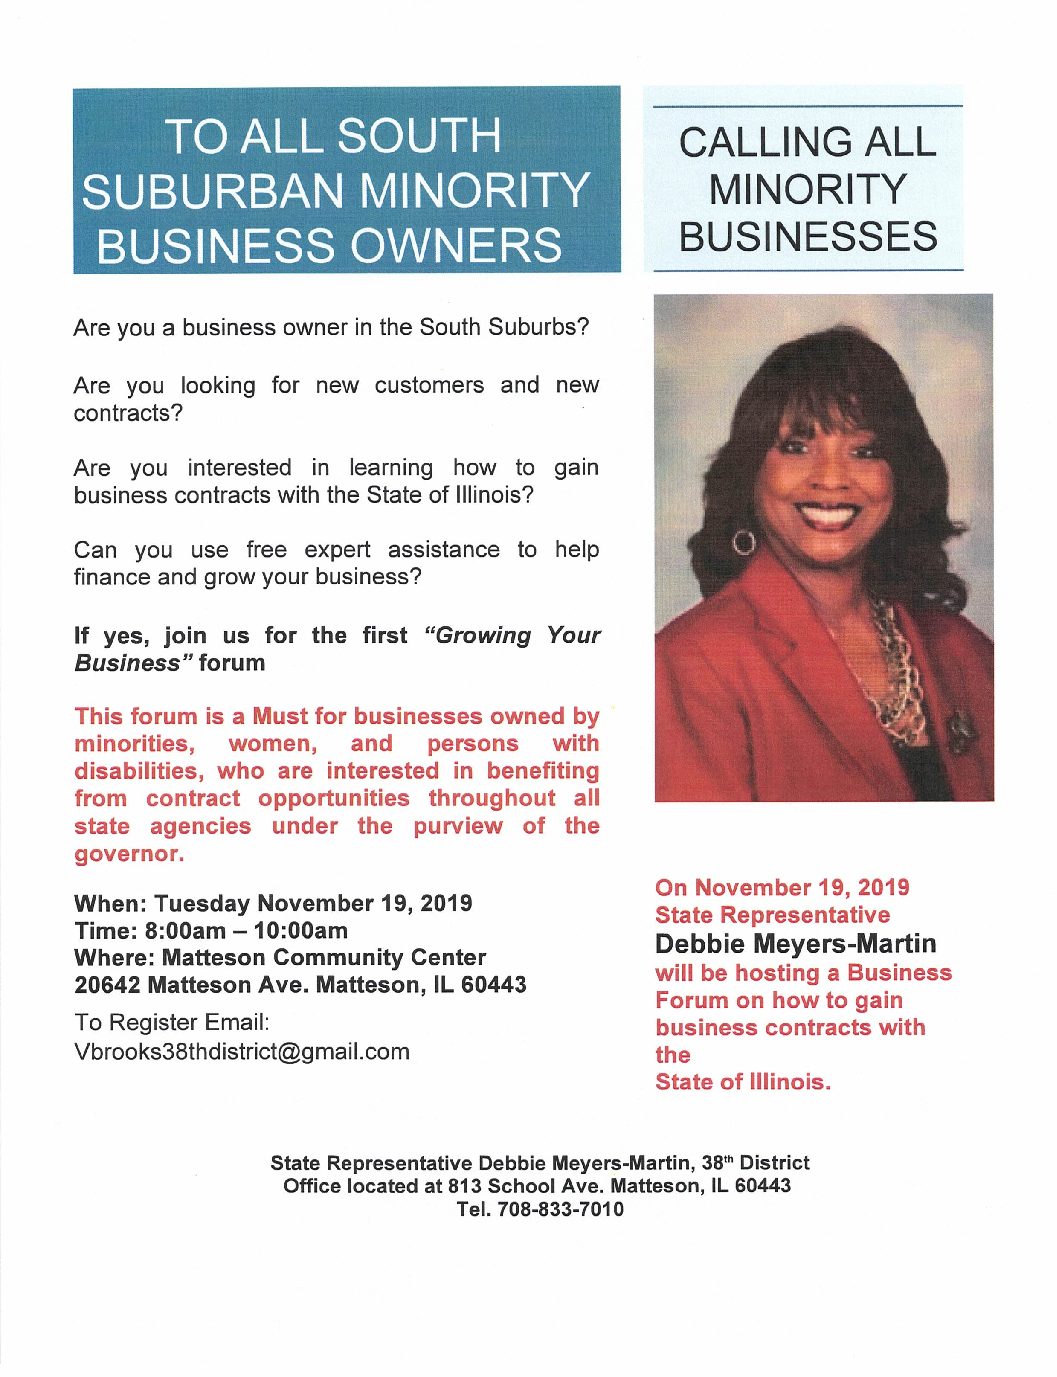 “Minority Business Forum: Business Contracts with The State of Illinois”